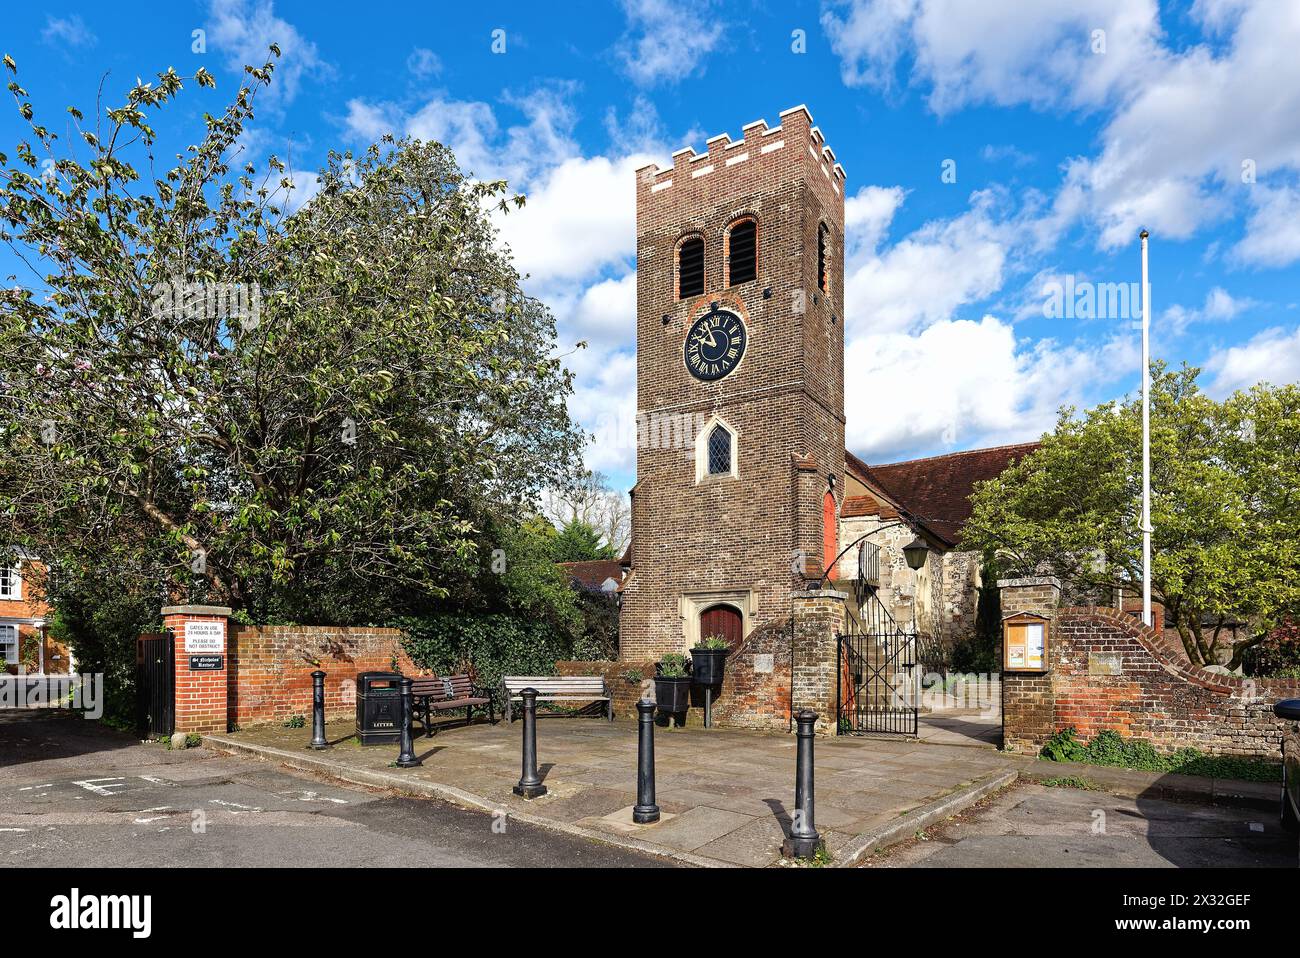 Exterior of St. Nicholas Anglican parish church in Church Square on a sunny spring day Shepperton Surrey England UK Stock Photo